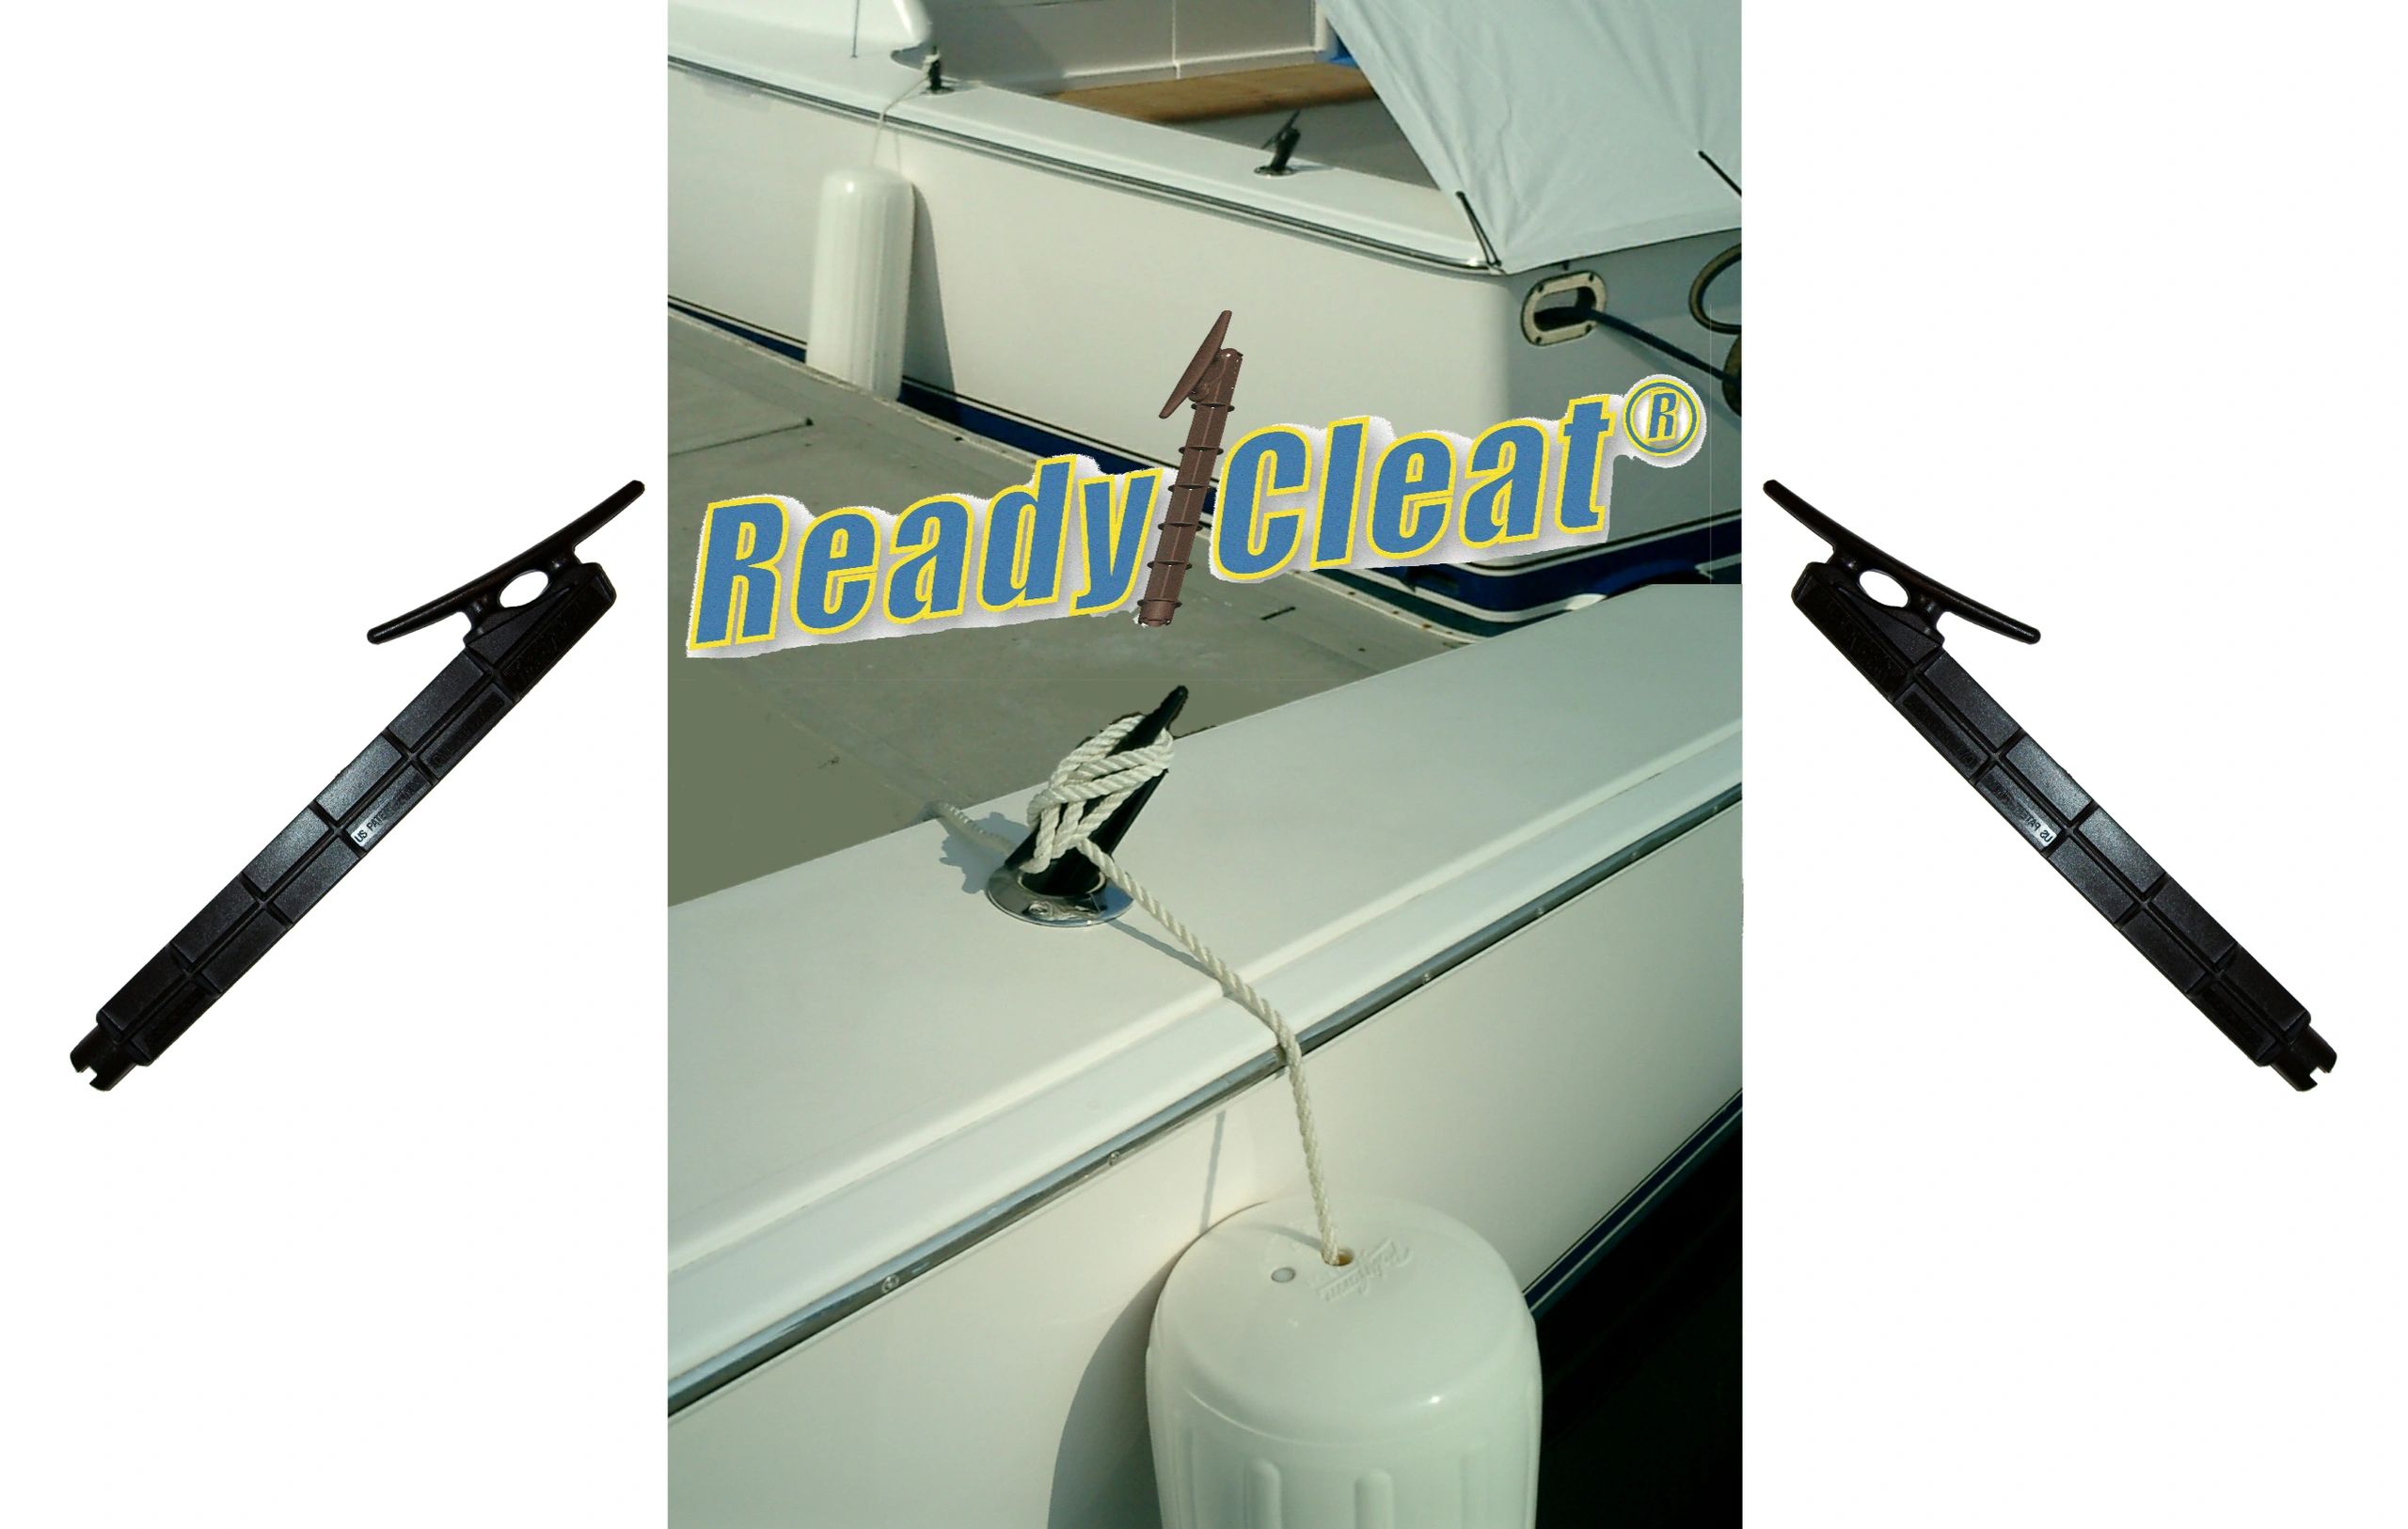 Boating accessory a portable cleat for quickly setting boat fenders.